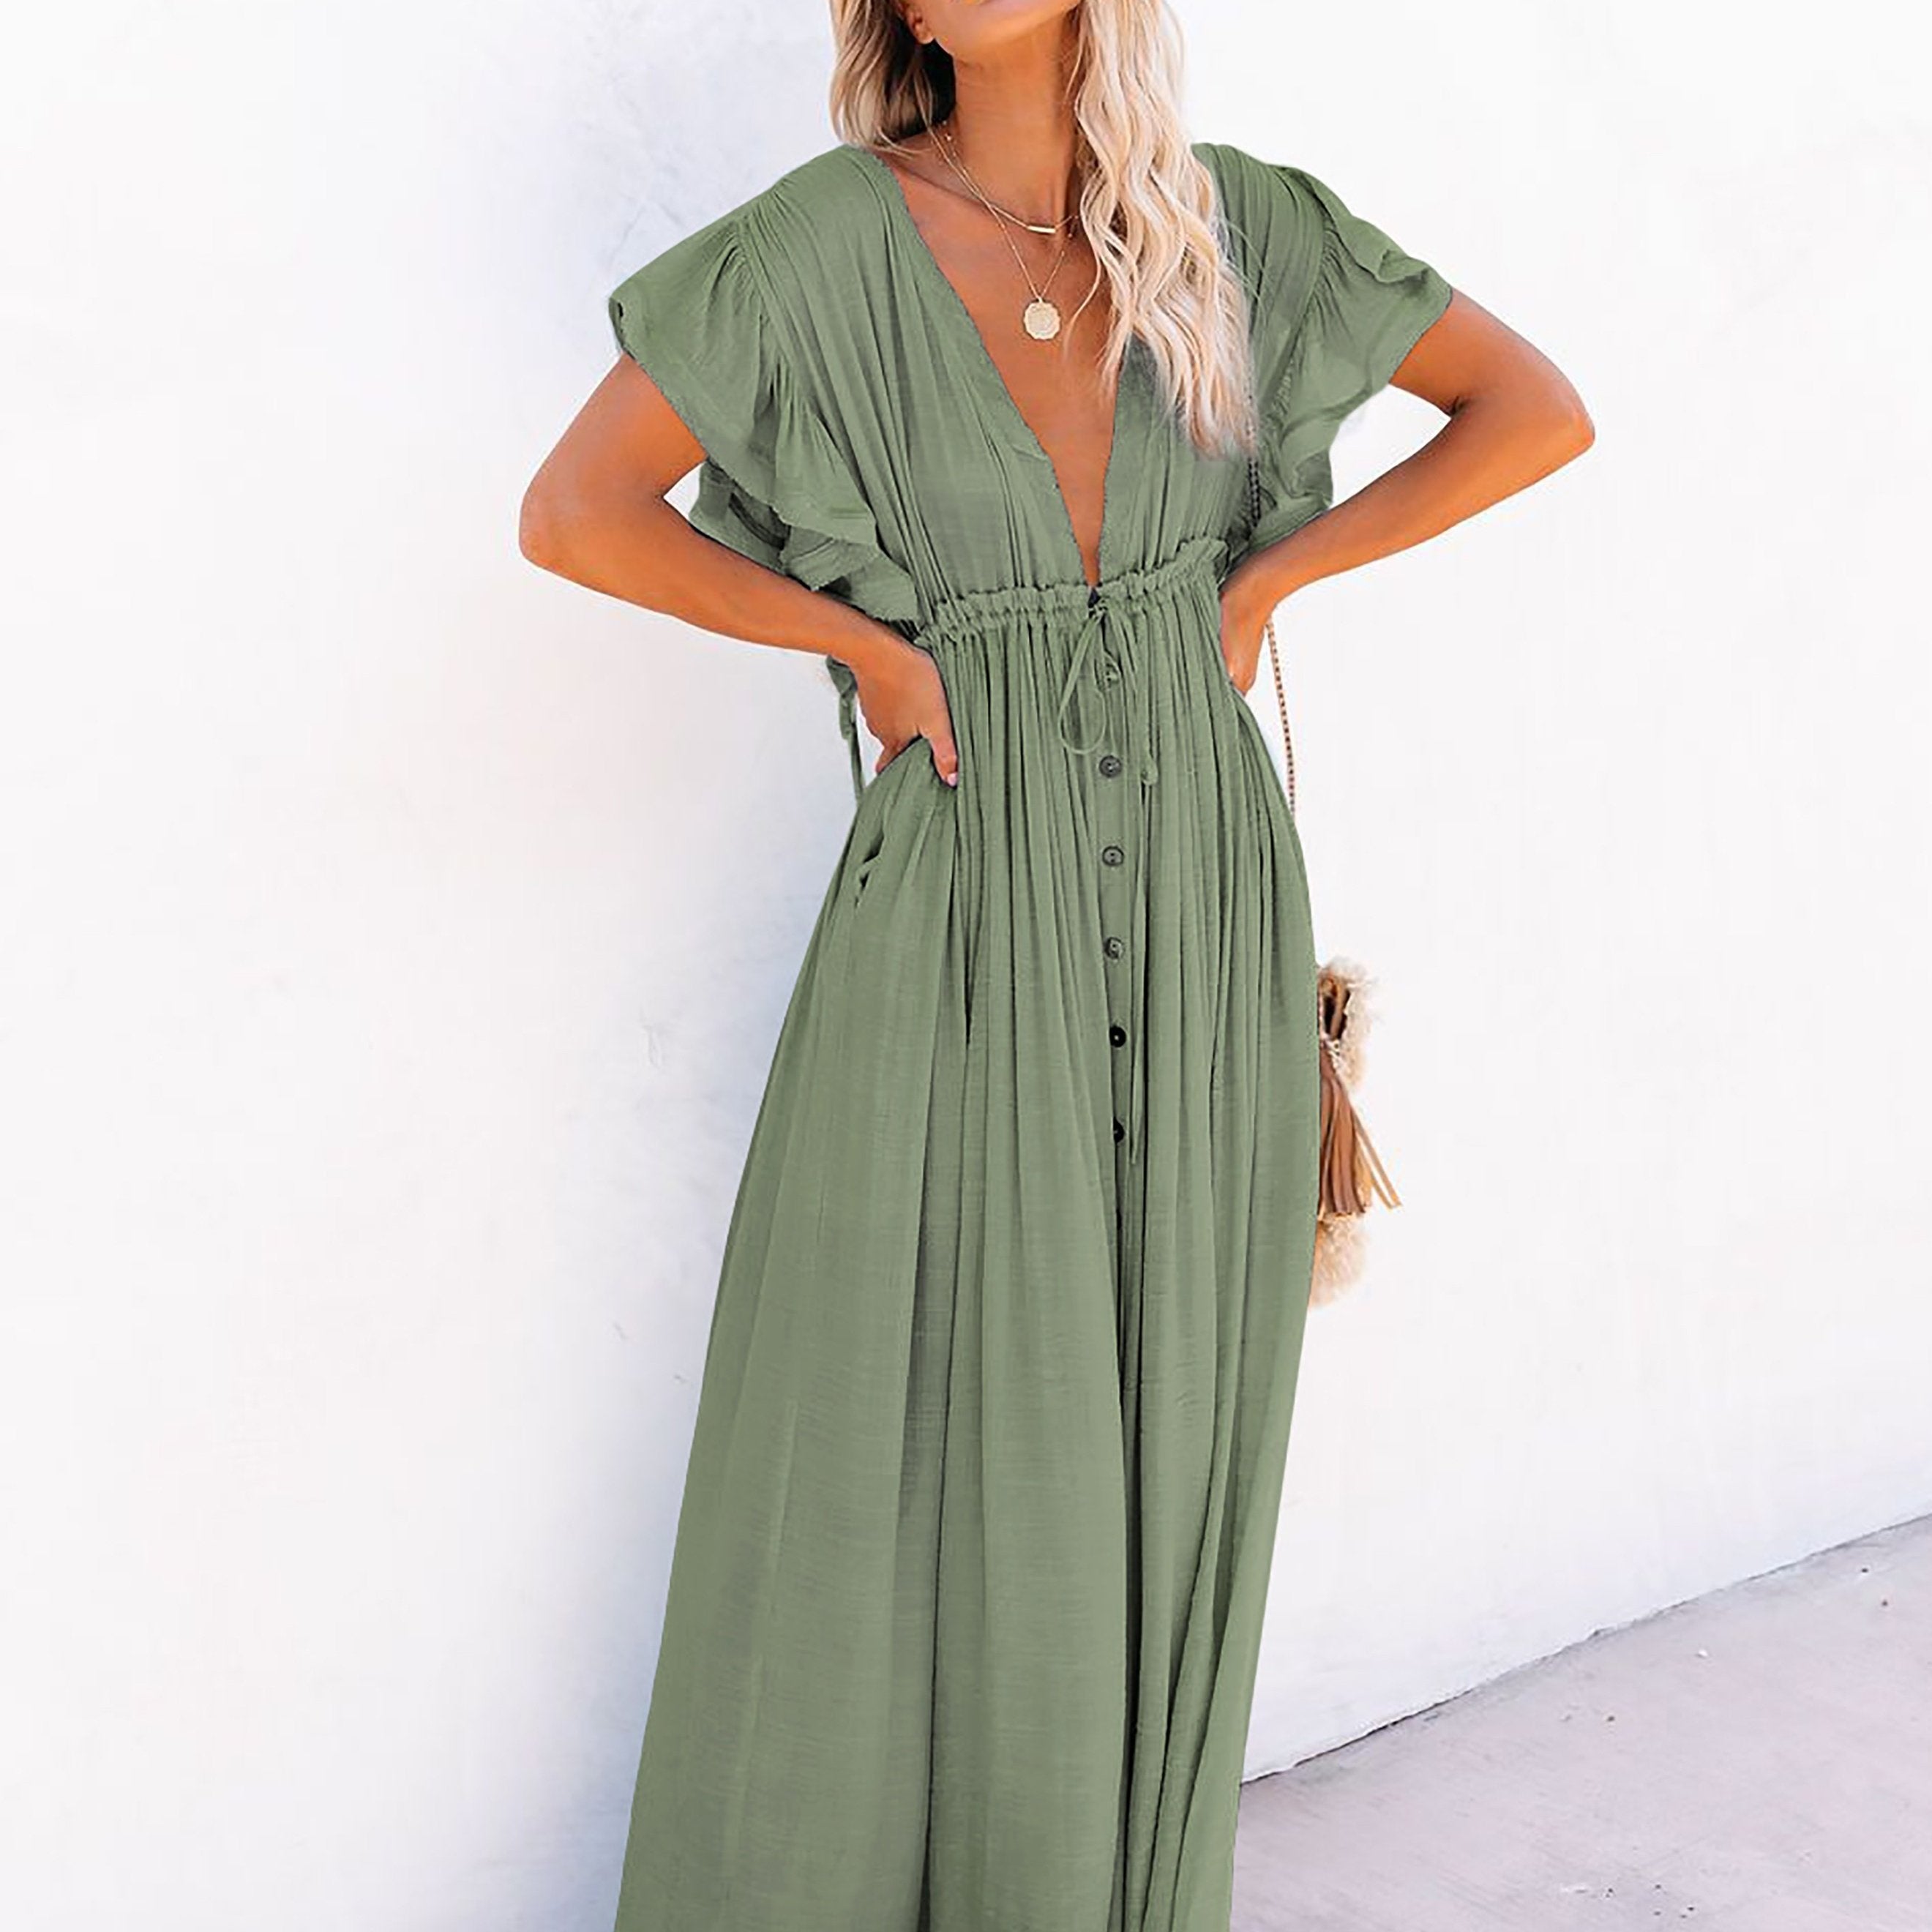 「lovevop」Ruched Plunging Dress, Vacation Beach Solid Drawstring Ruffle Trim Maxi Dress, Women's Clothing